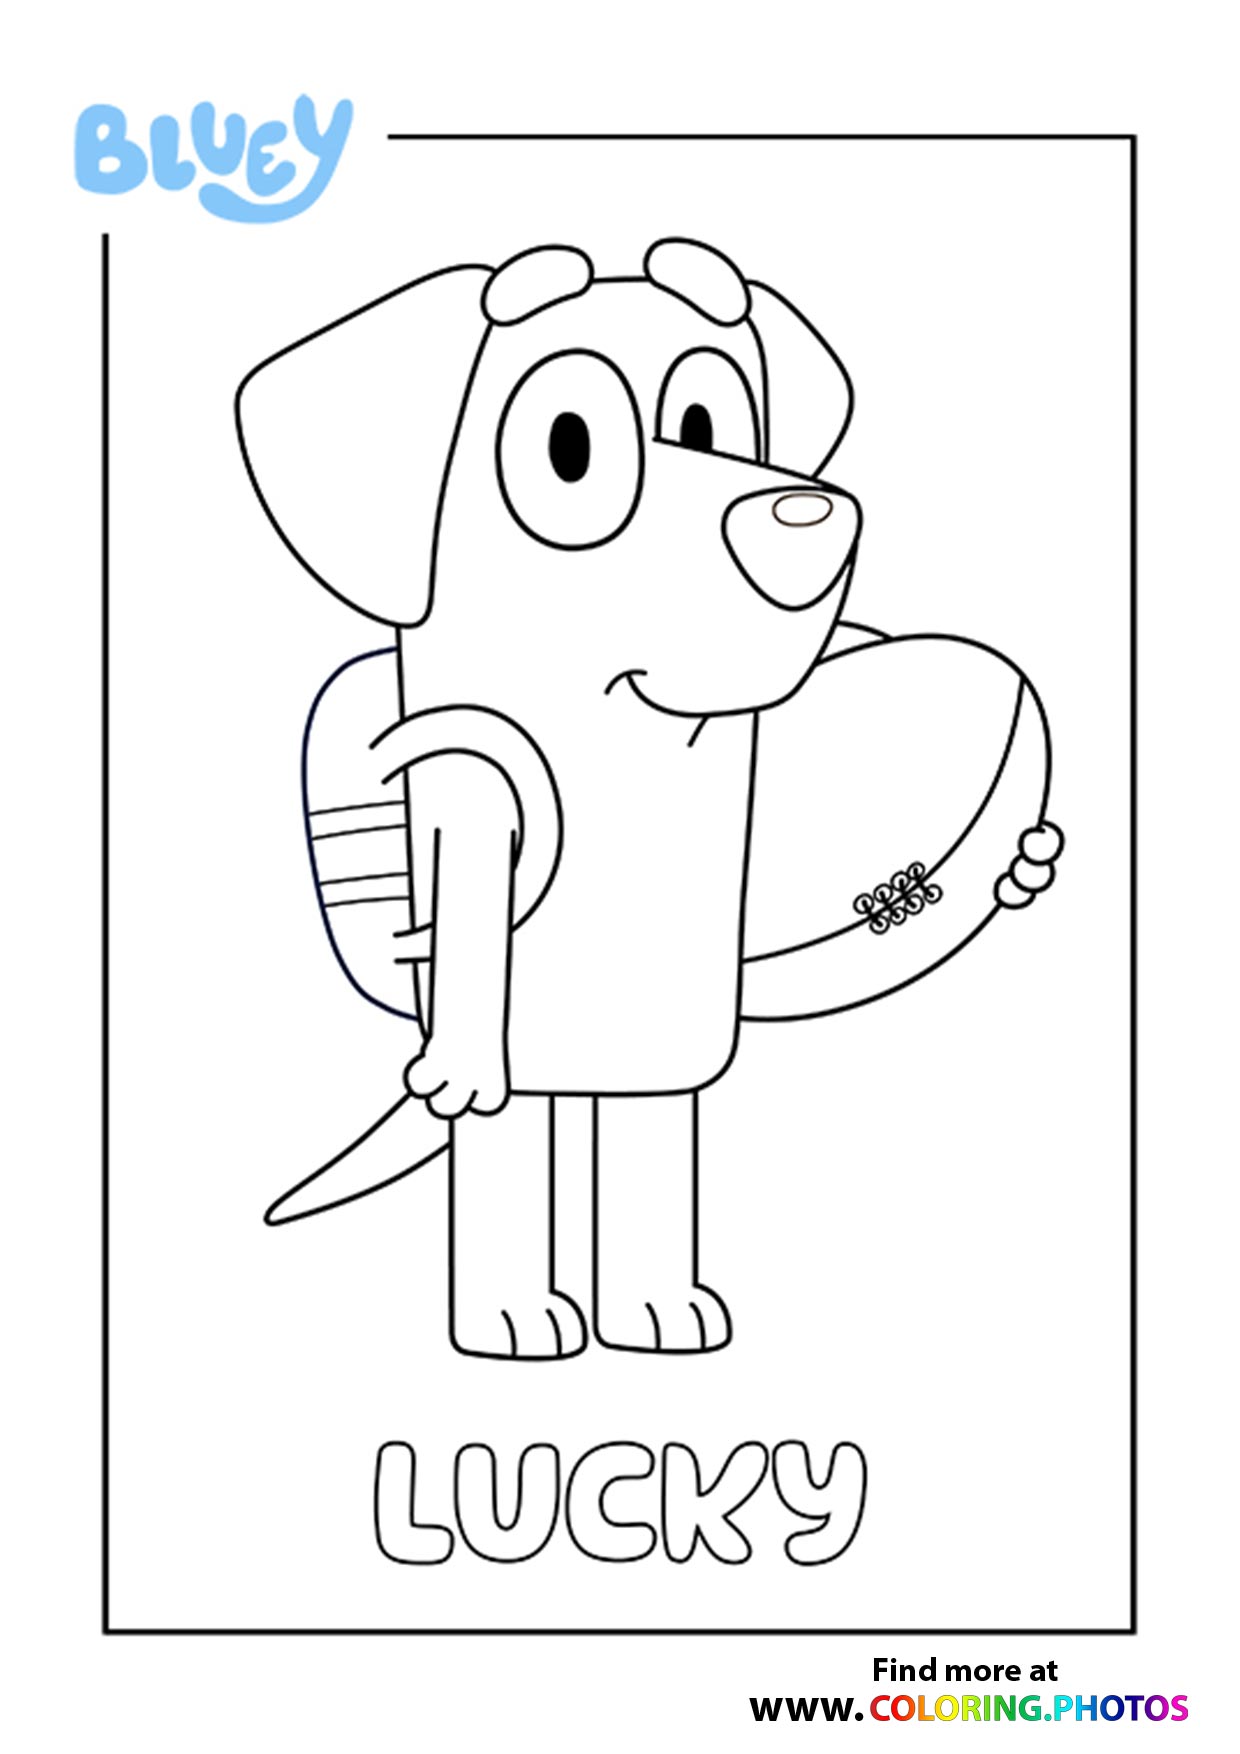 Bluey Lucky   Coloring Pages for kids